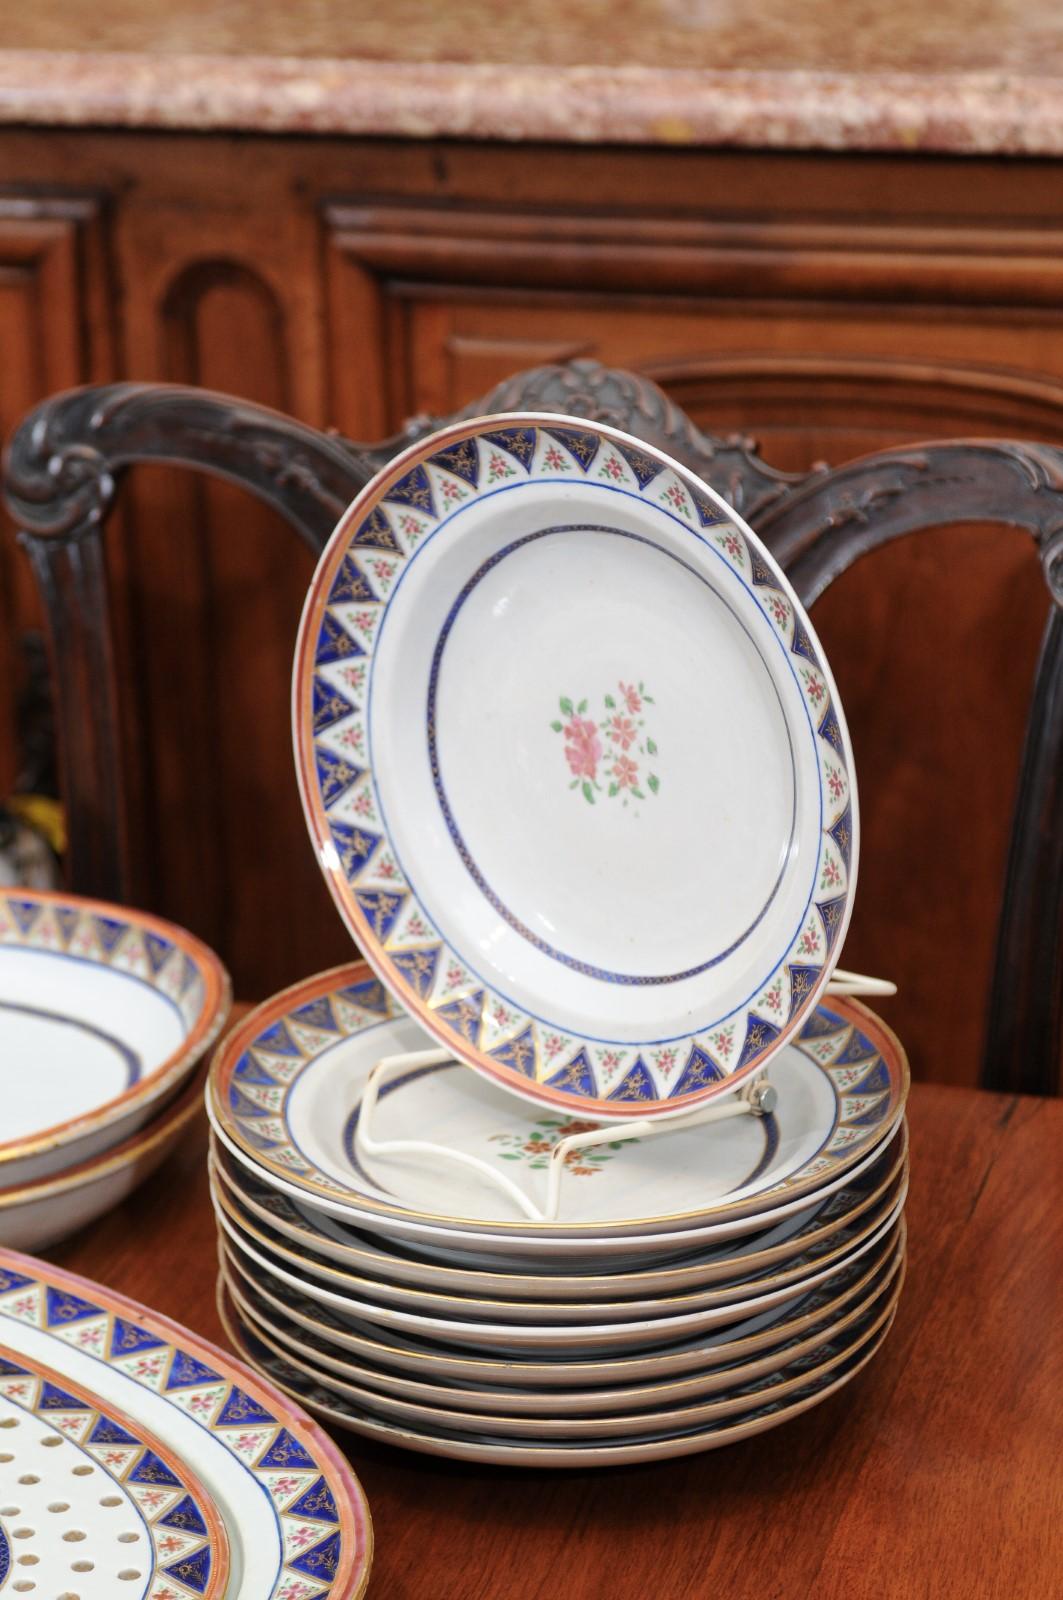 19th C. Chinese Export Famille Rose Porcelain Part-Dinner Service, 45 Piece Set For Sale 11